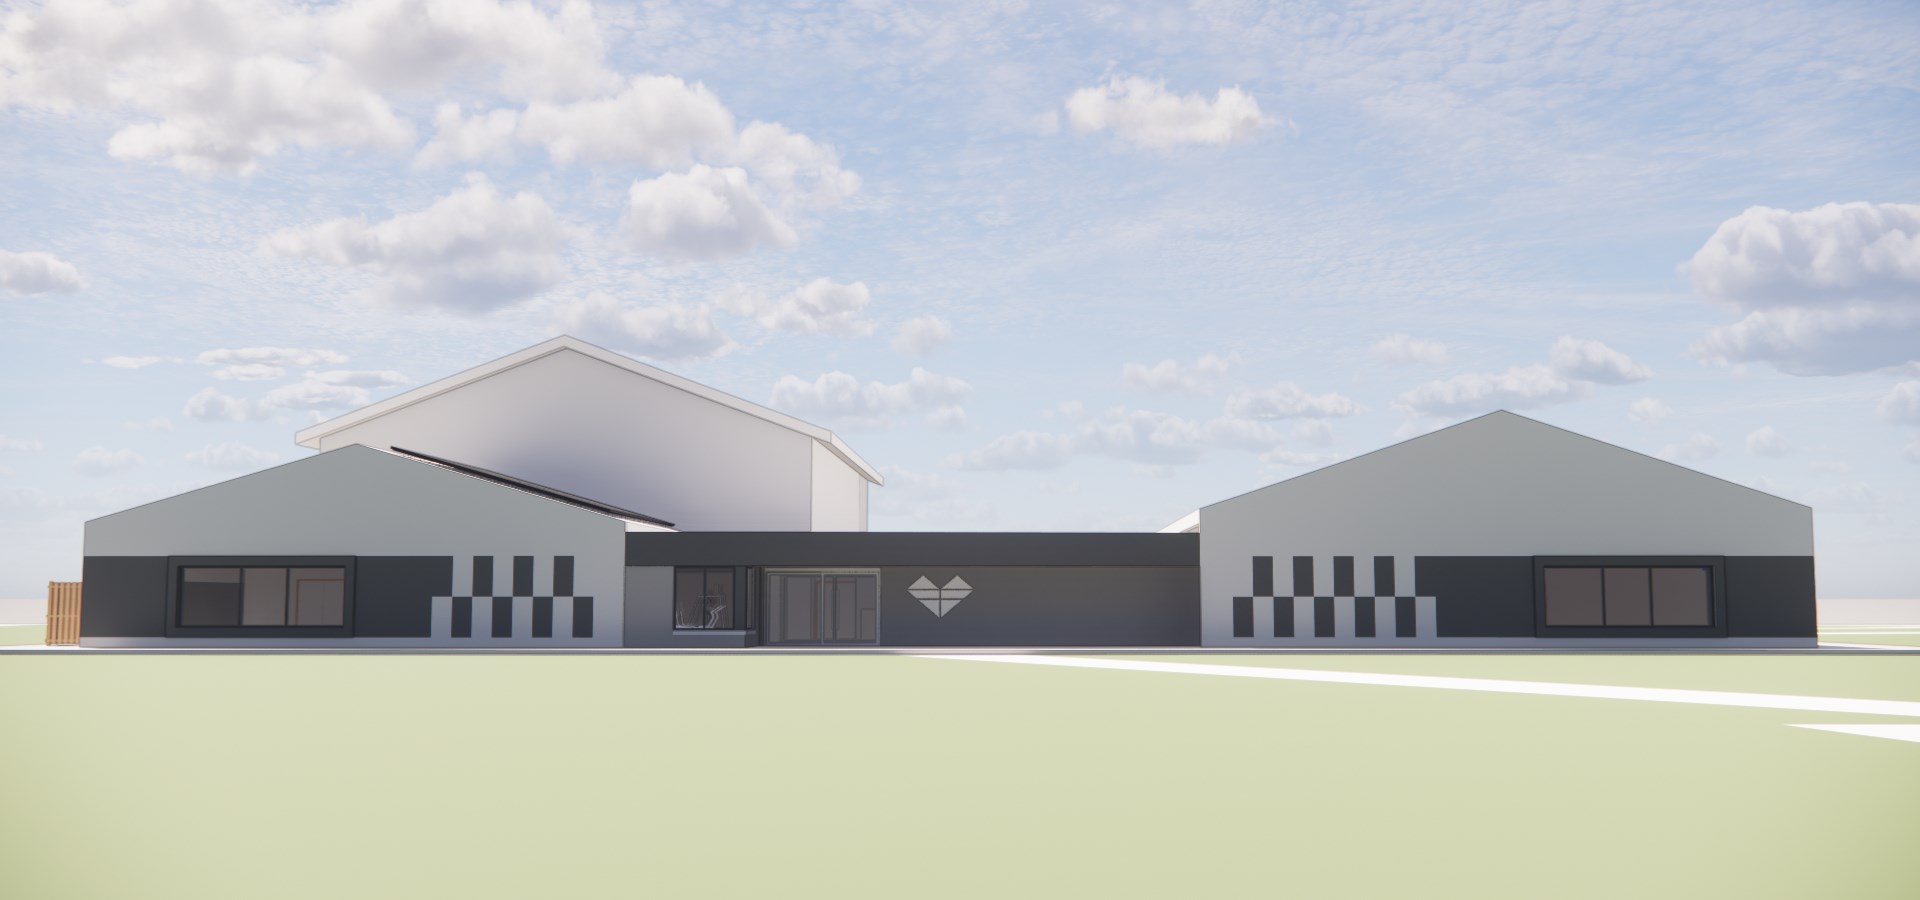 An artist impression of the new leisure centre layout